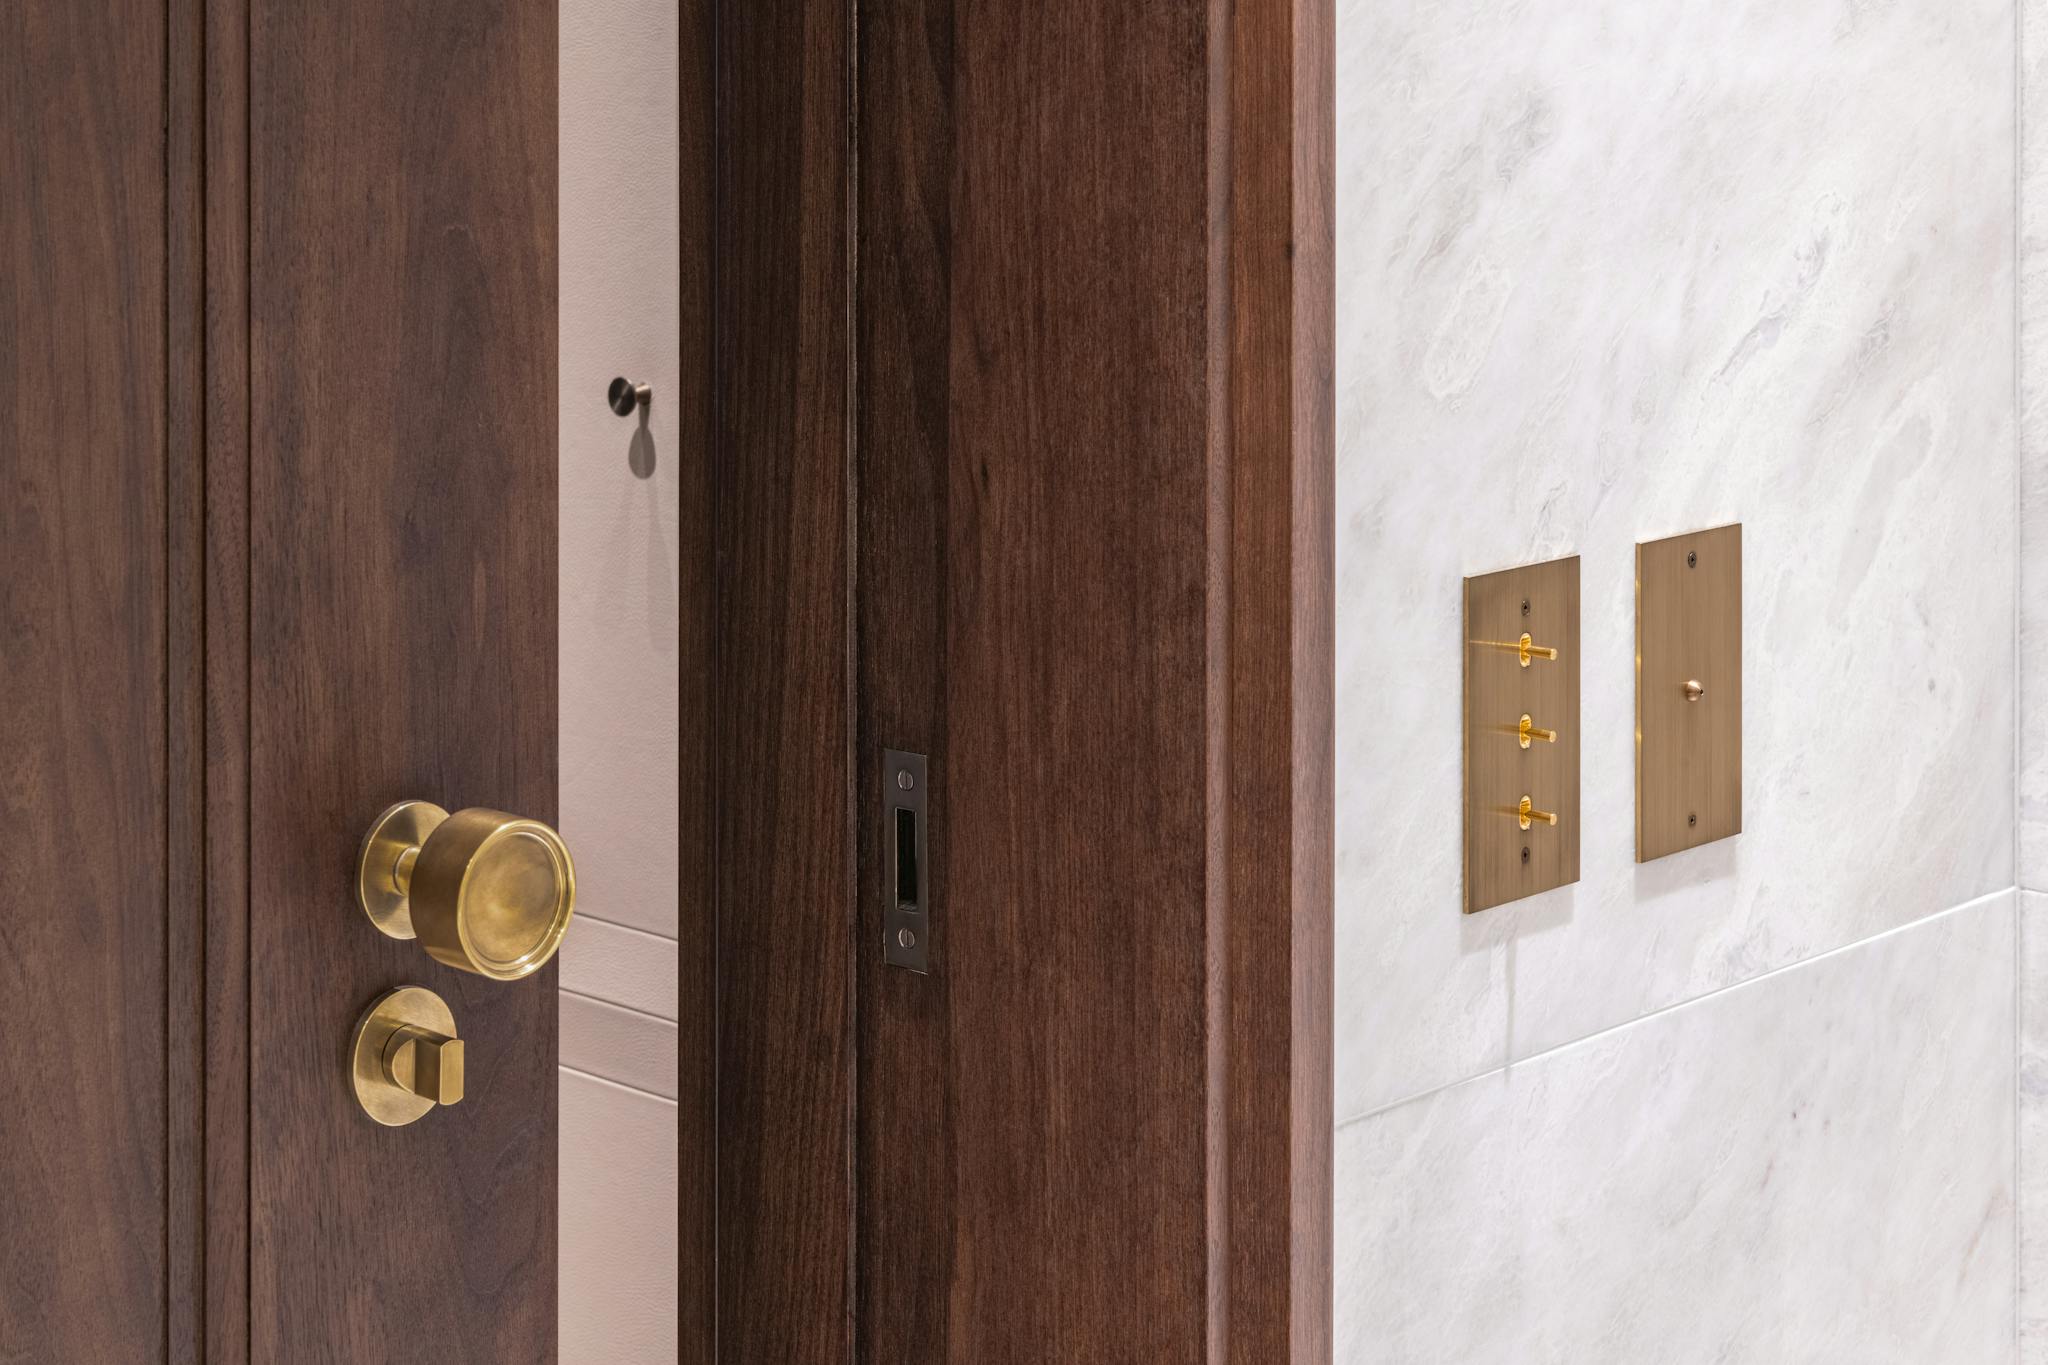 Dark wood door frame with heavy set door with solid brass ironmongery against a pale tiled wall and electrical toggle plates.